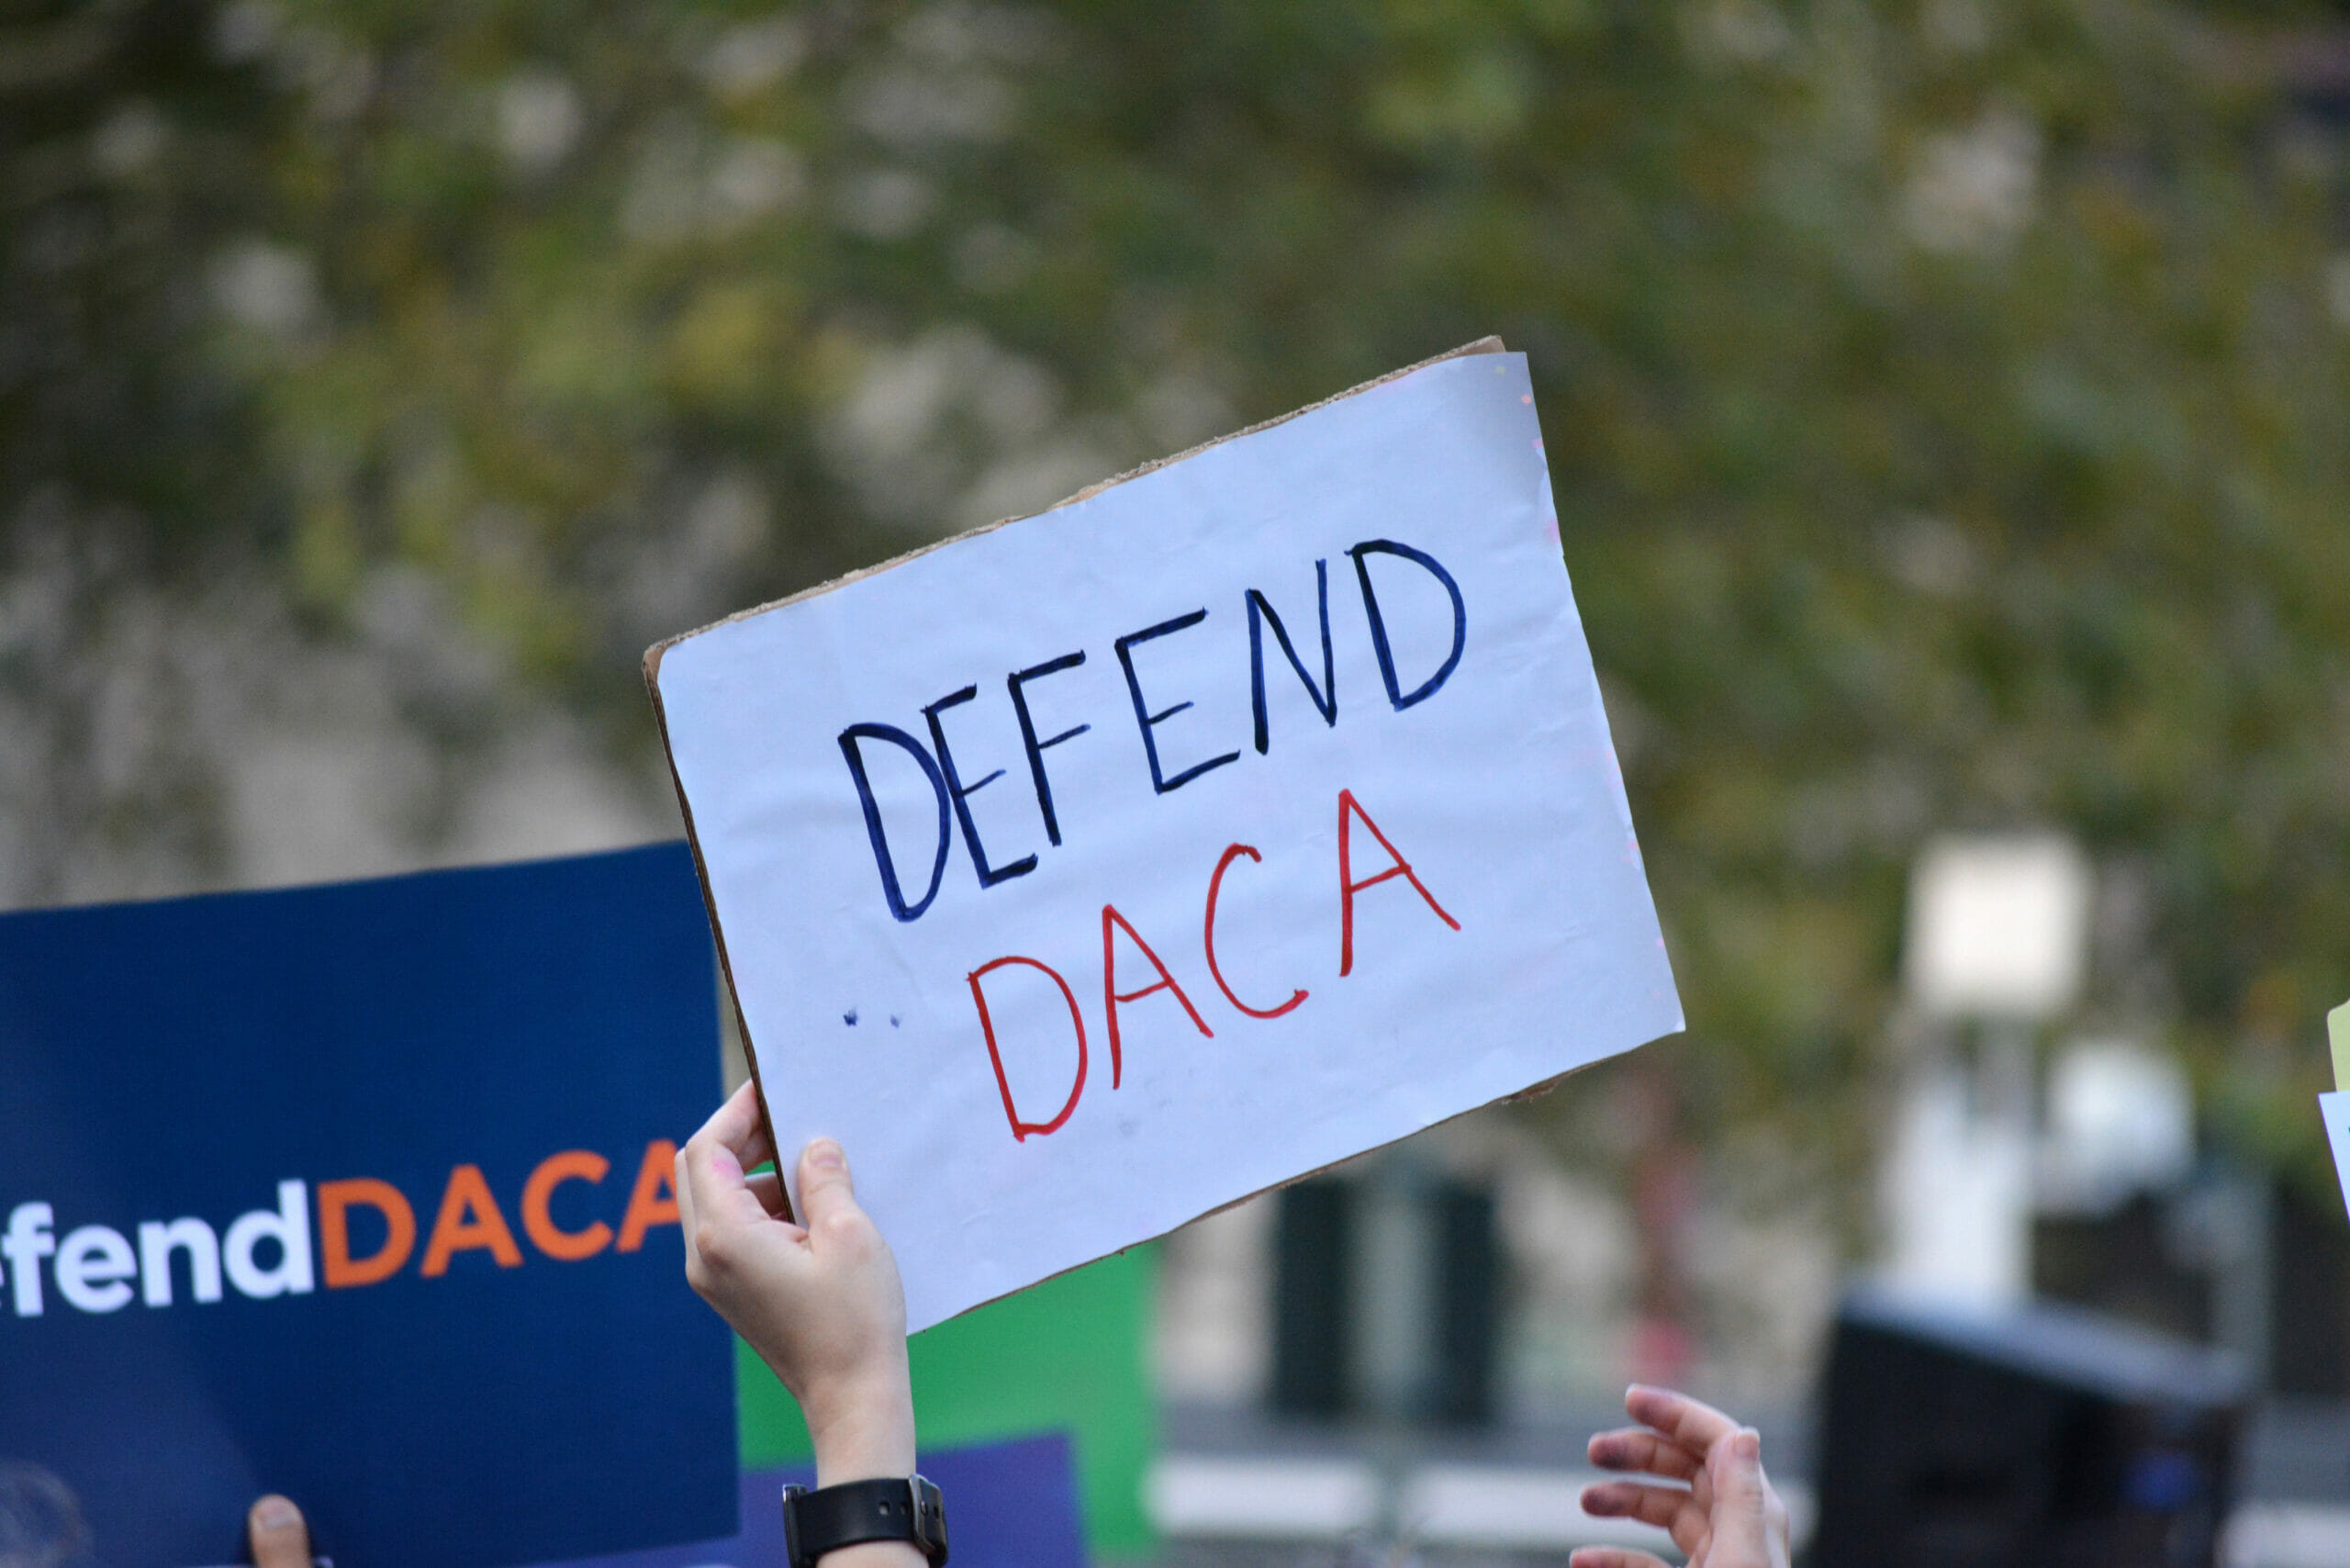 A hand holding a small white sign at a rally that says "Defend DACA"